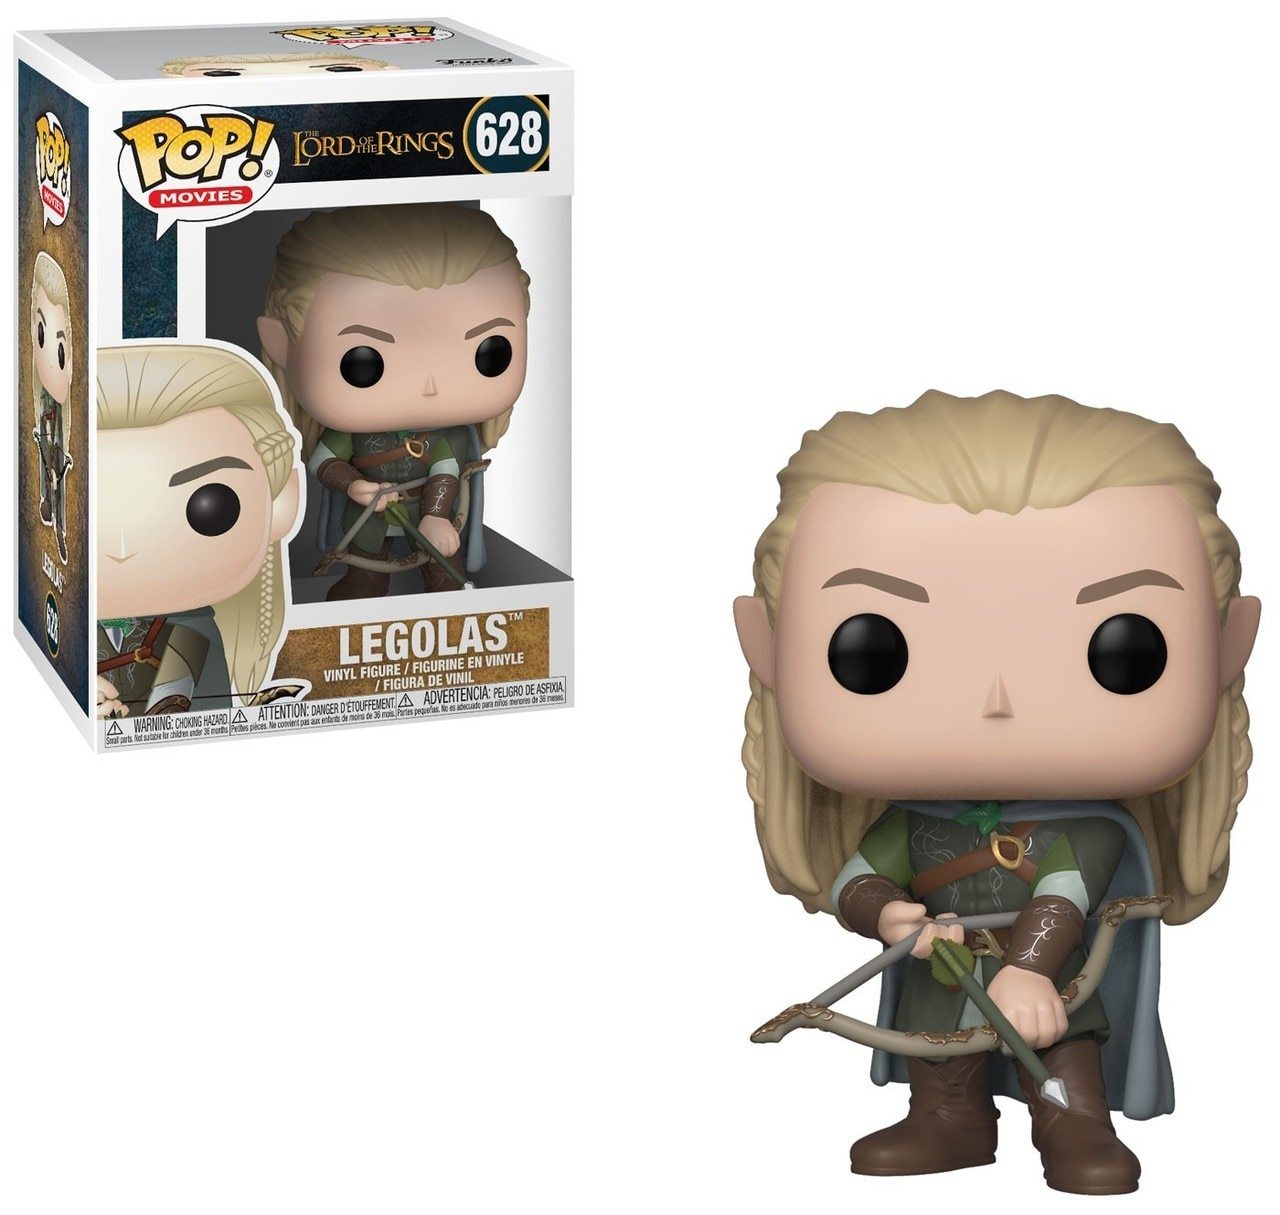 Funko Pop Movies: Lord of The Rings

